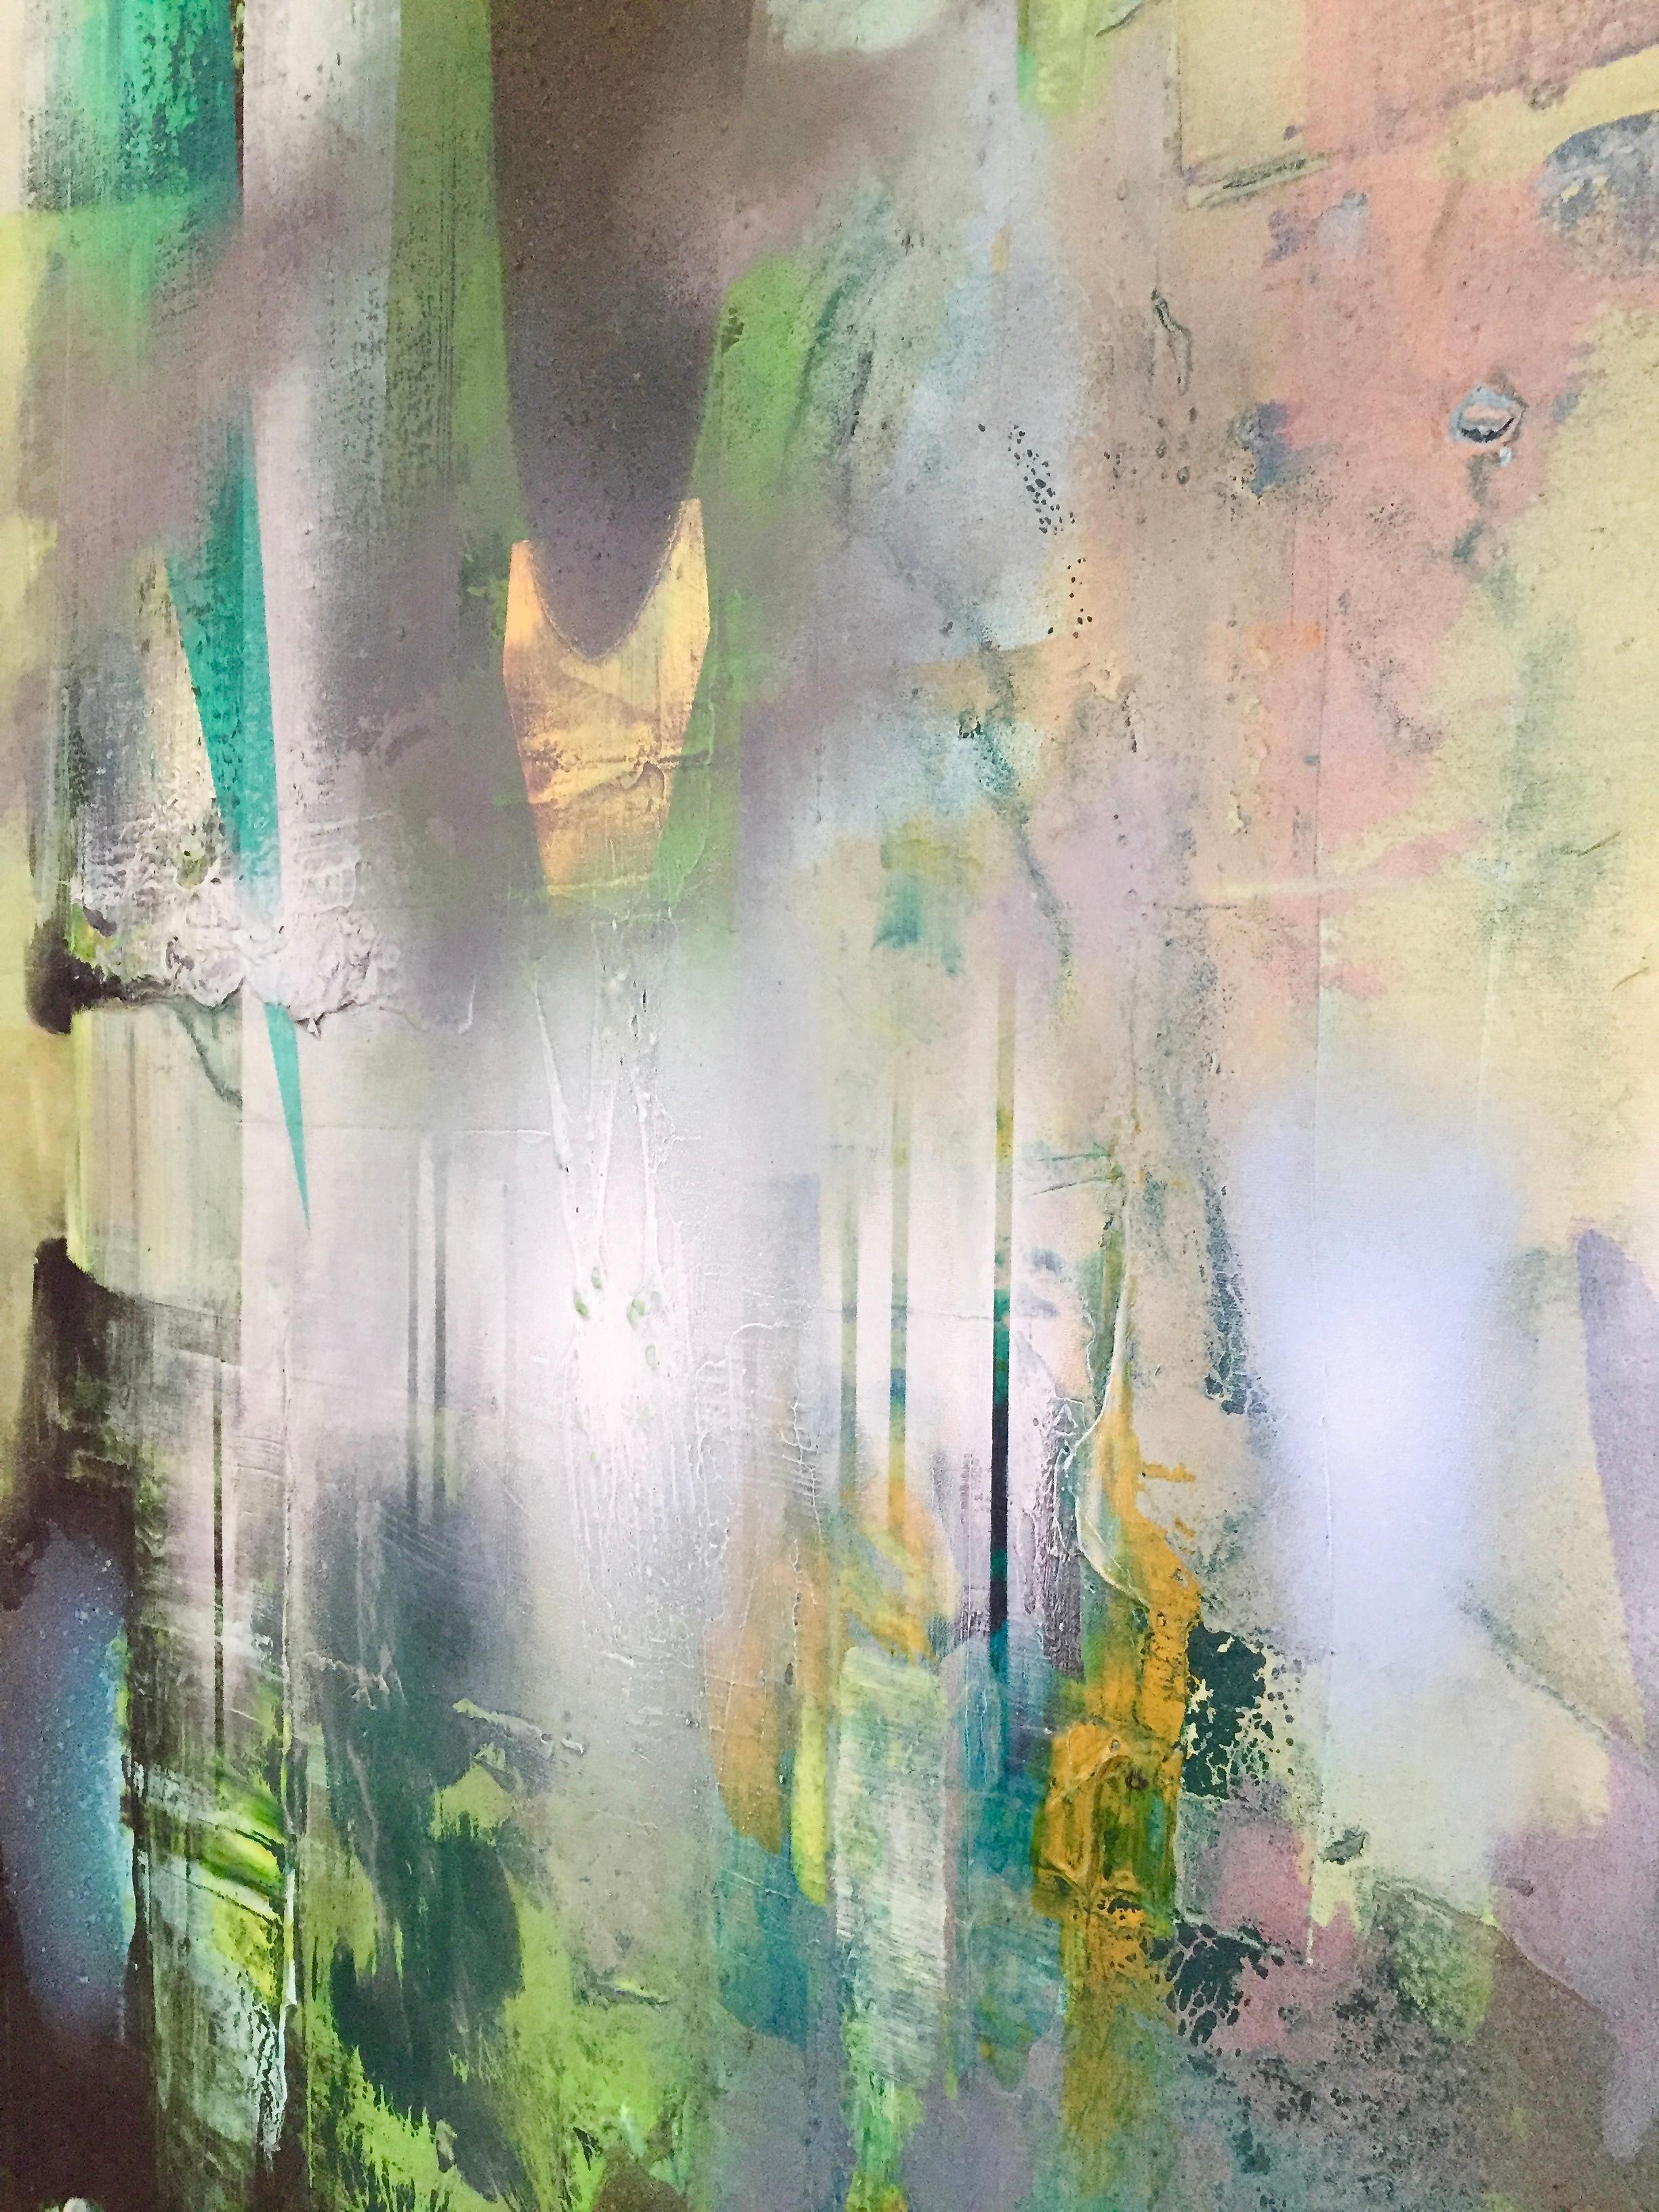 Petrichor 1 - Abstract Painting by Melisa Taylor Metzger